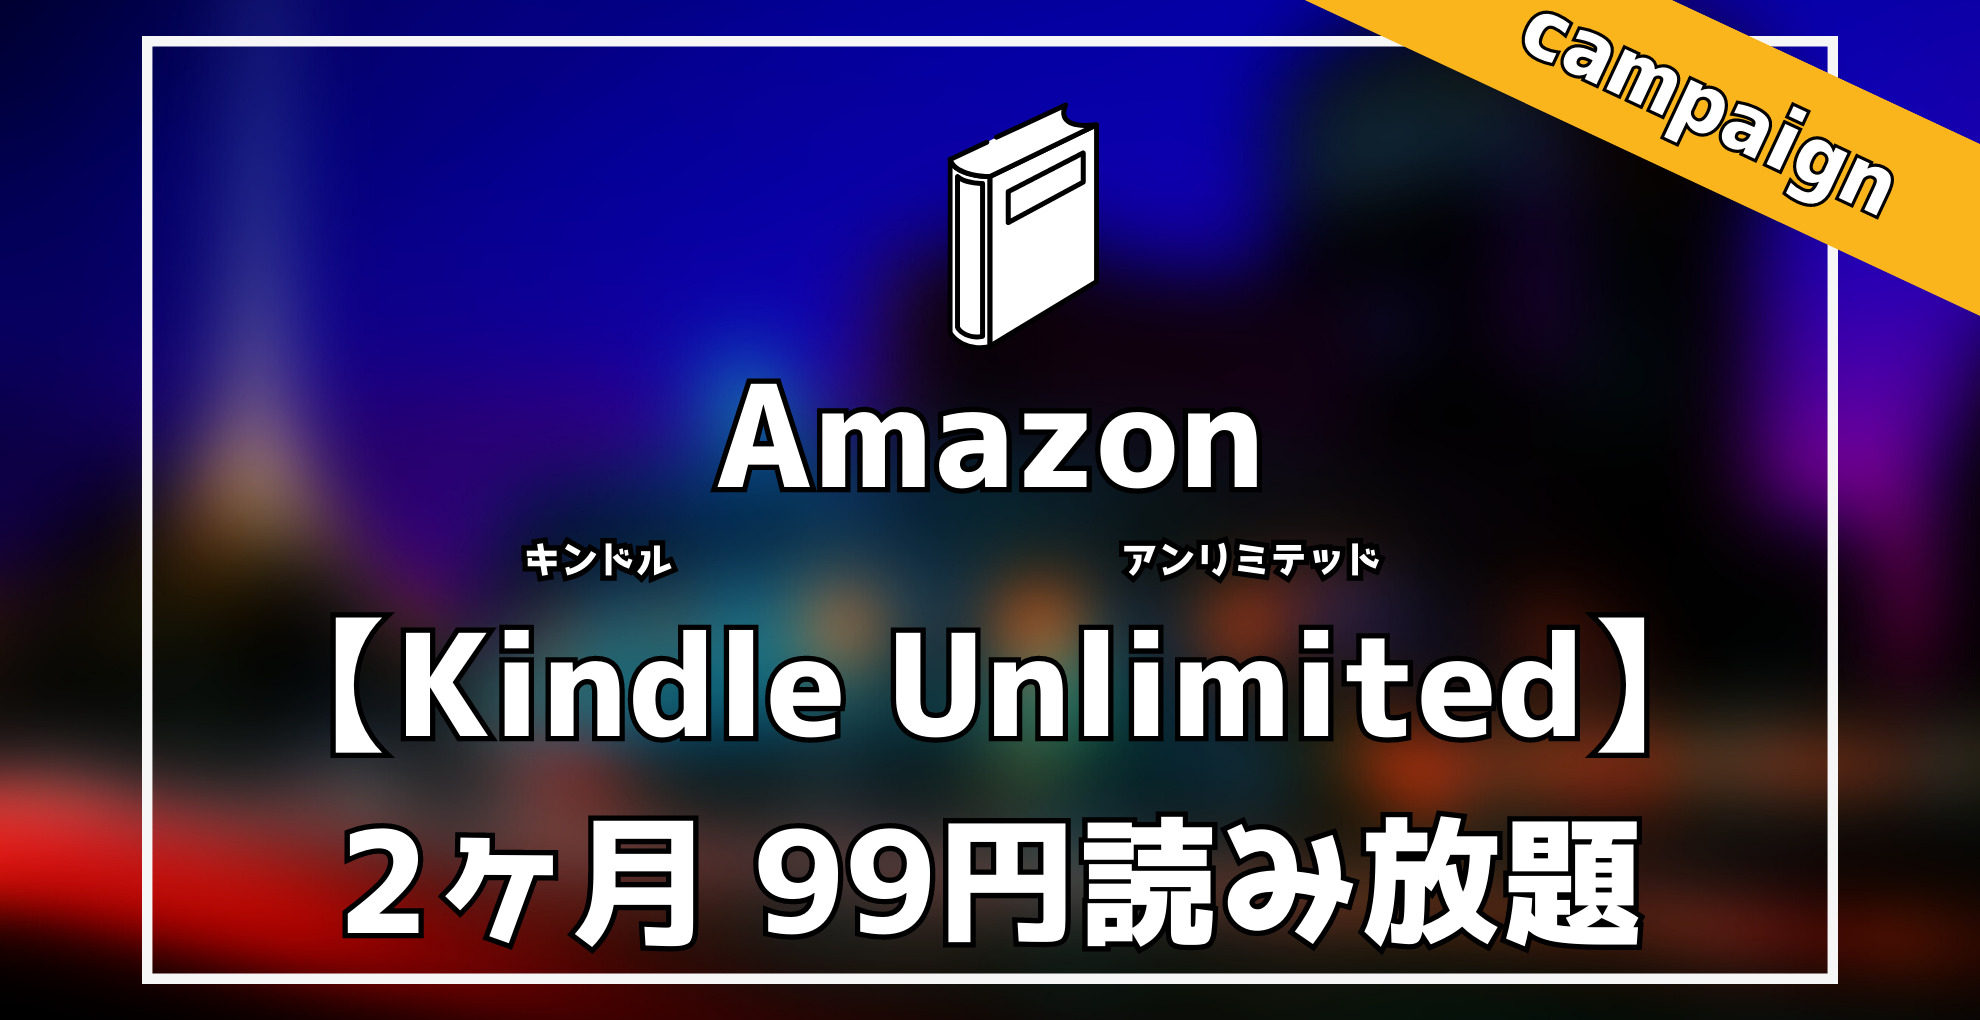 Amazon Kindle Unlimited　2ヶ月99円読み放題キャンペーン